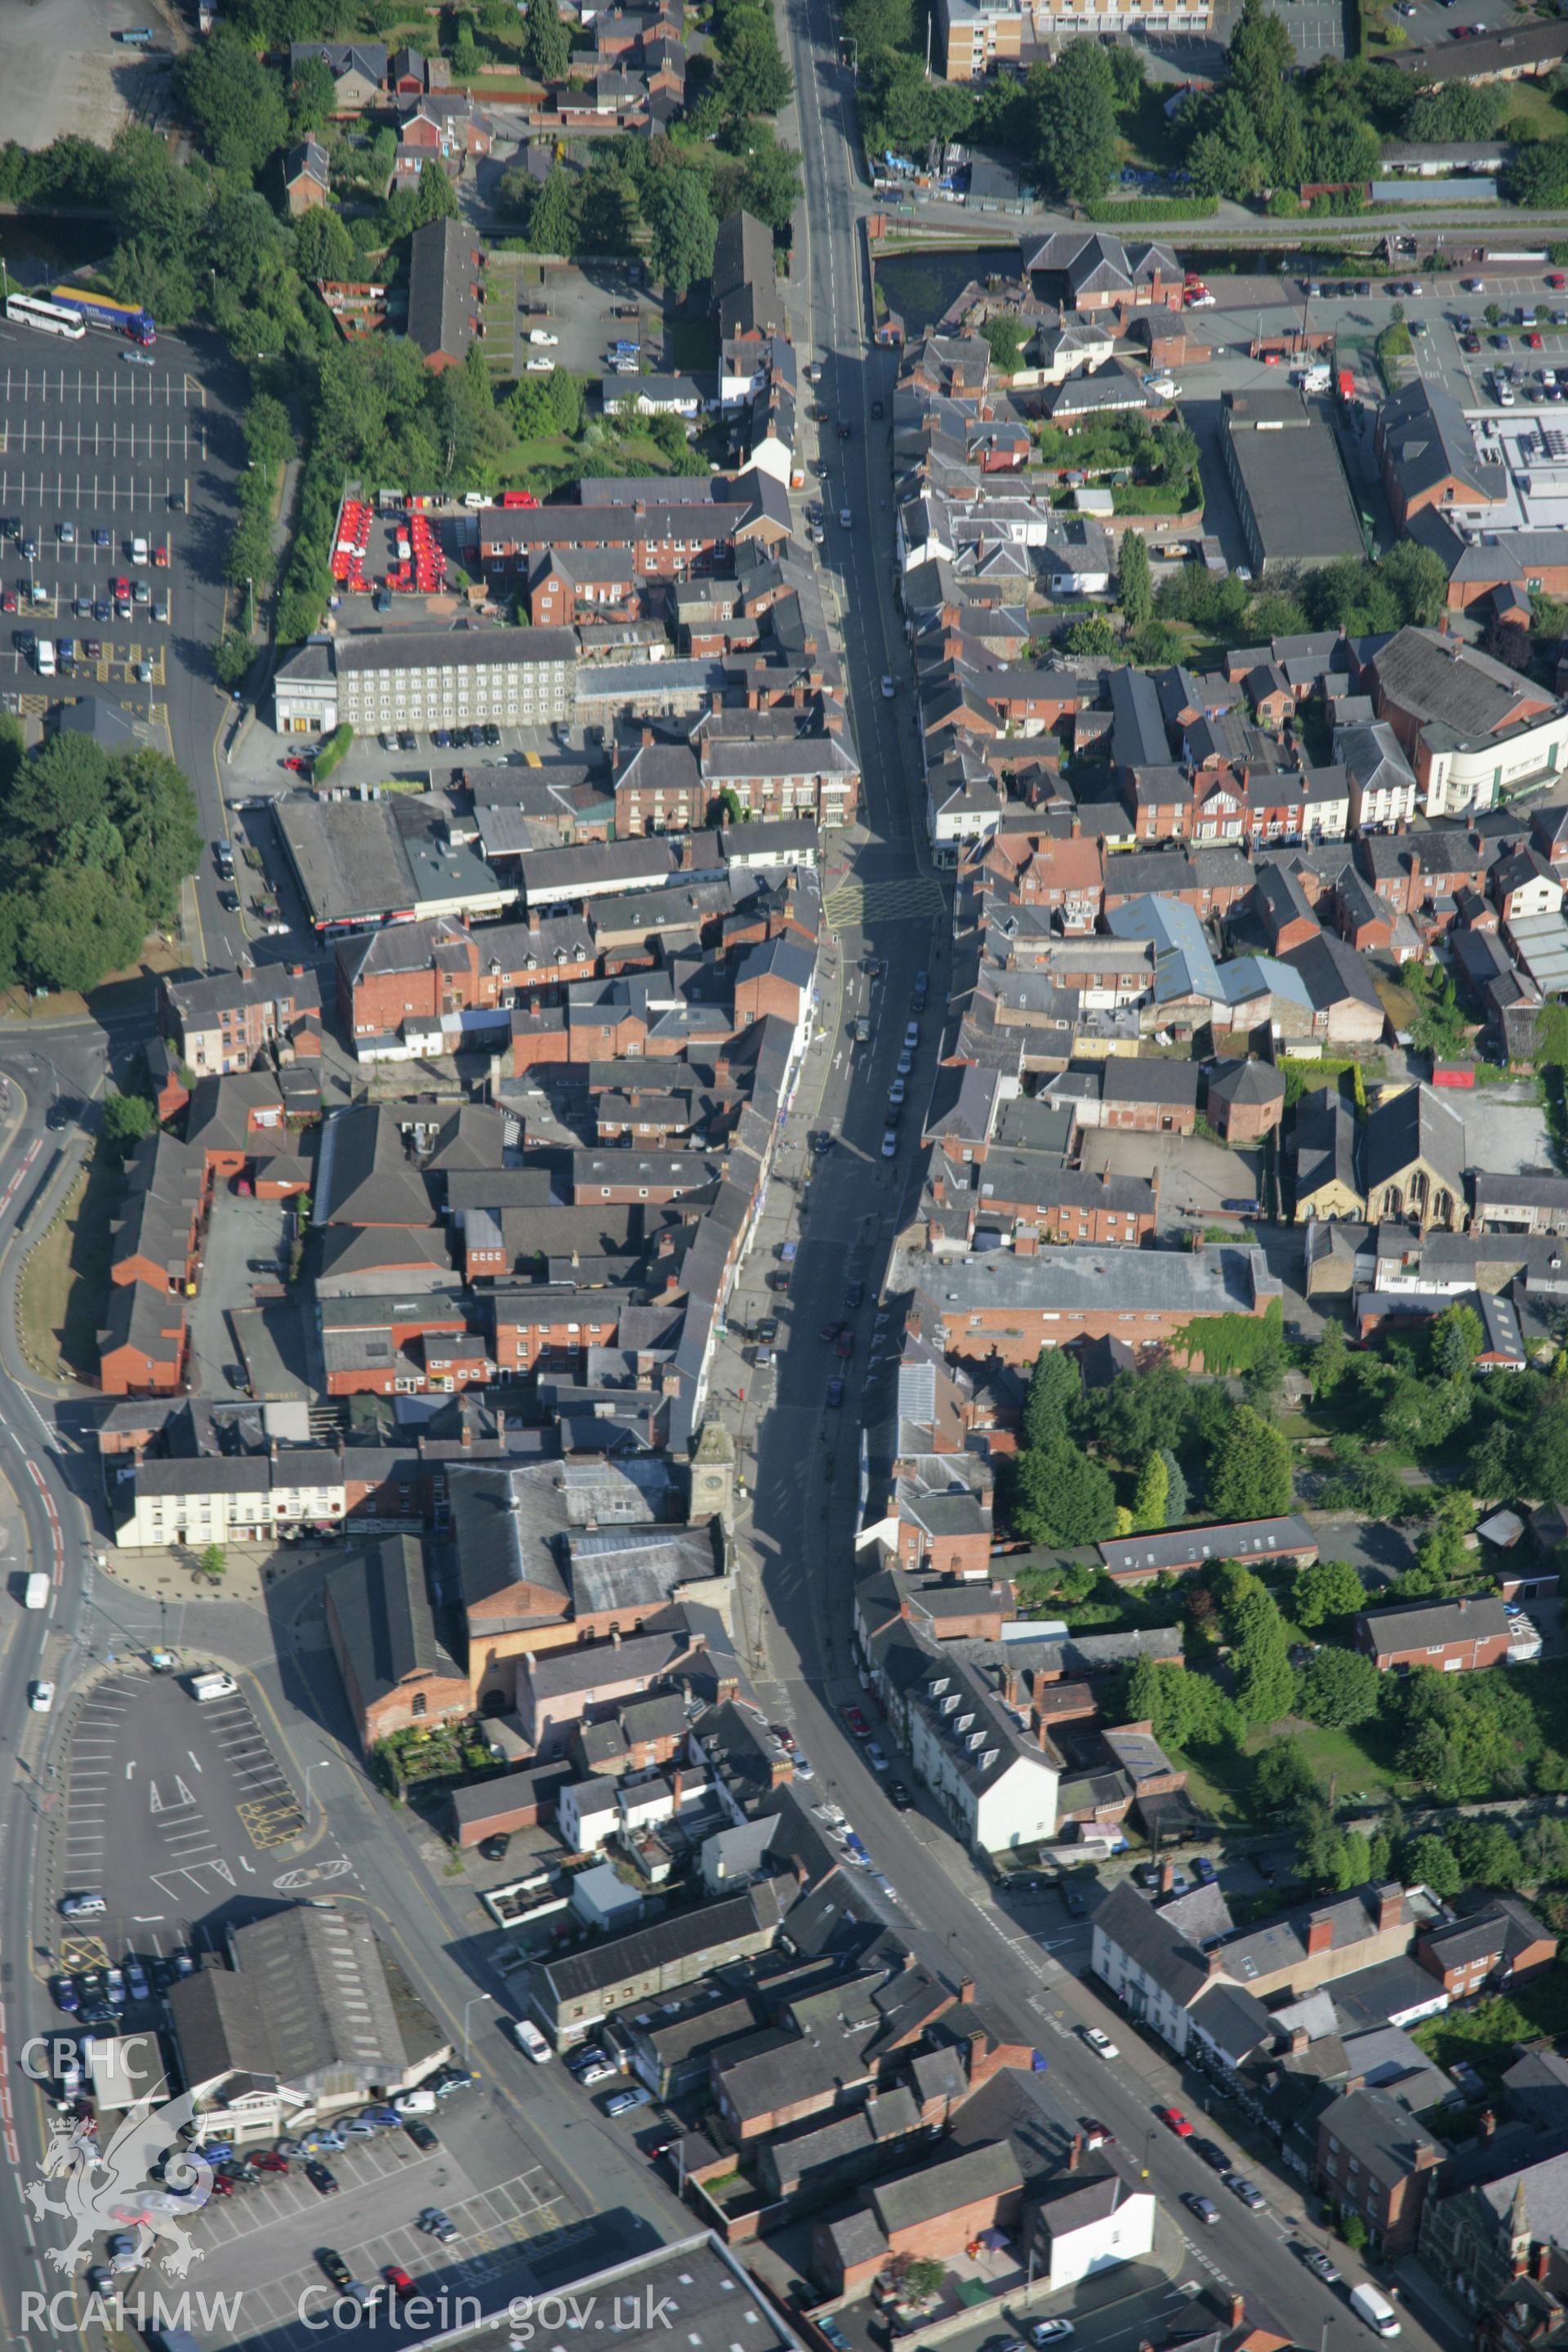 RCAHMW colour oblique aerial photograph of Welshpool. Taken on 17 July 2006 by Toby Driver.